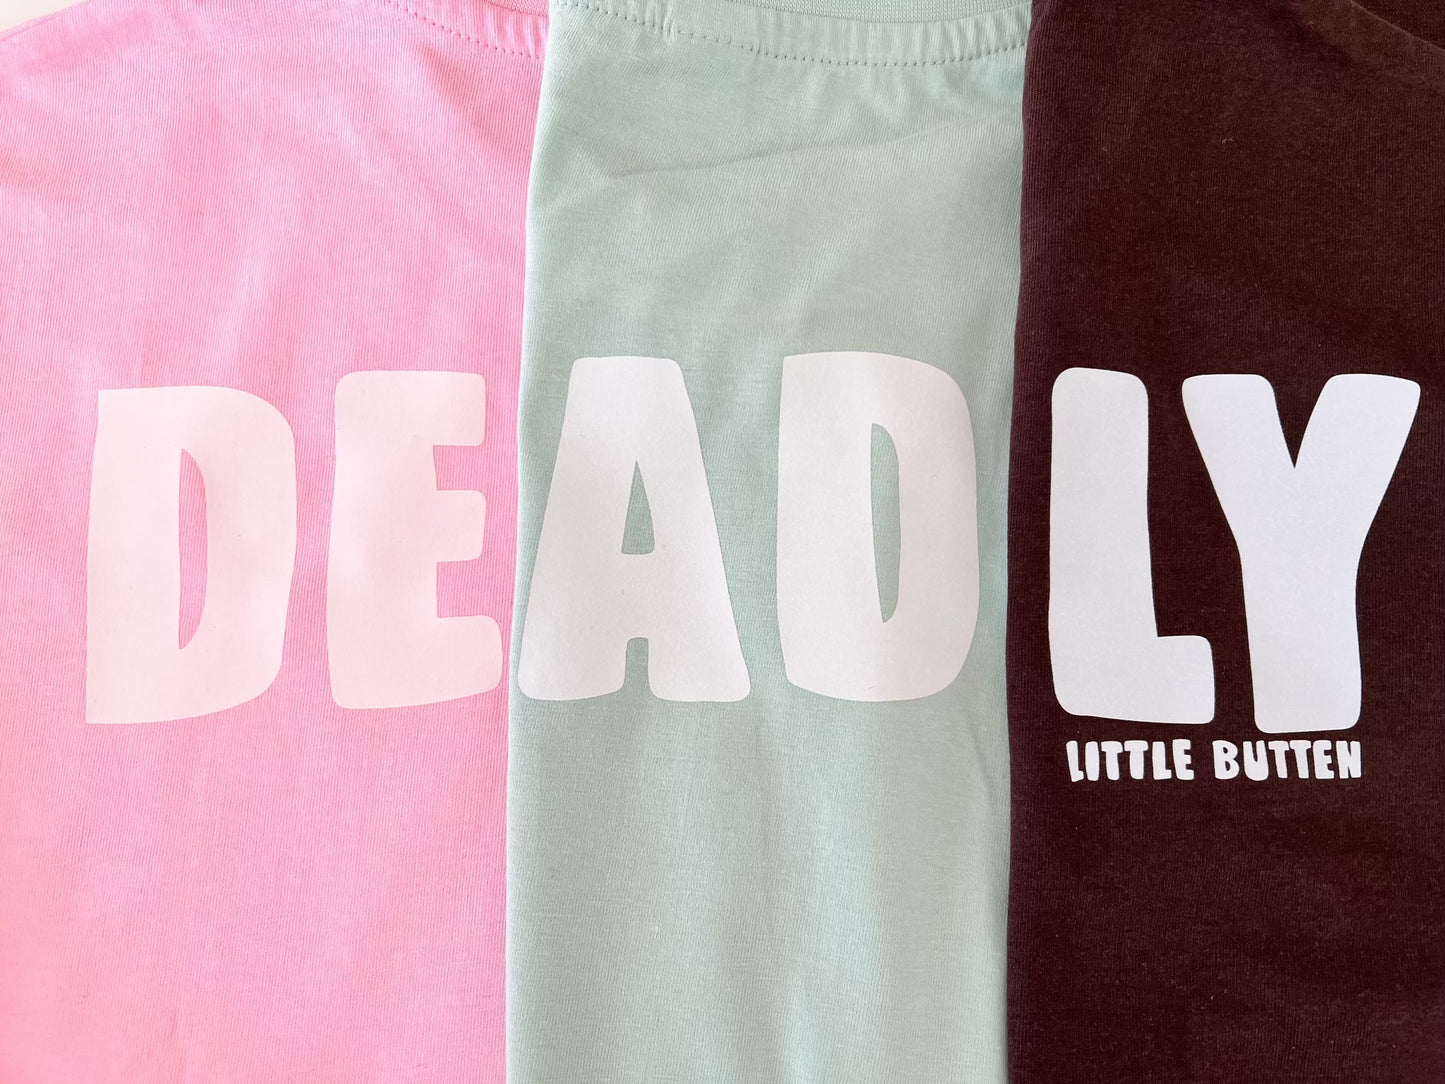 Spring Deadly Shirts